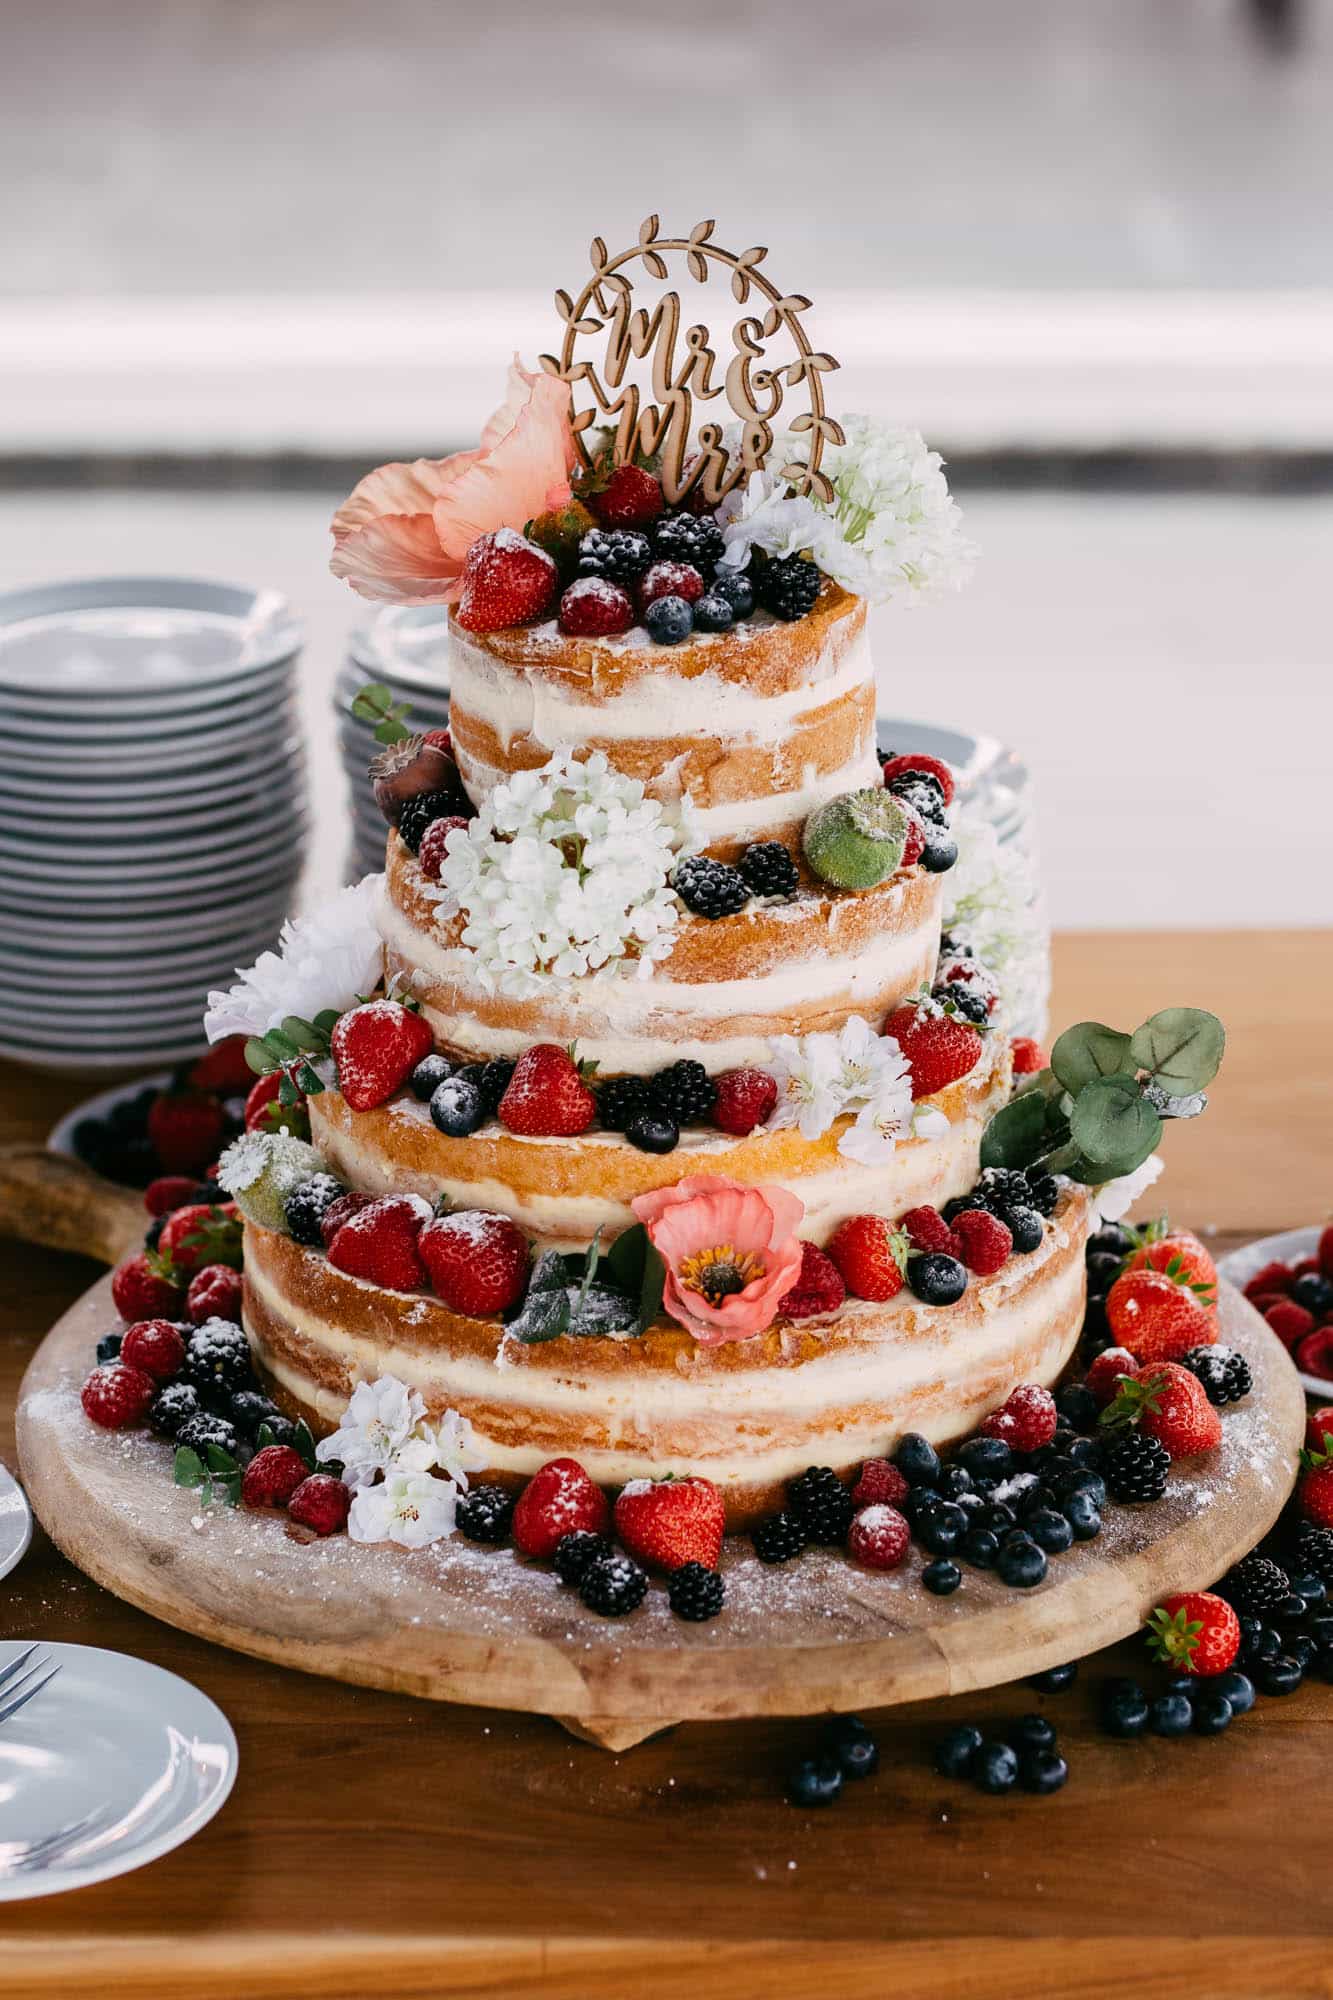 Naked wedding cake with flowers, fruit and icing sugar